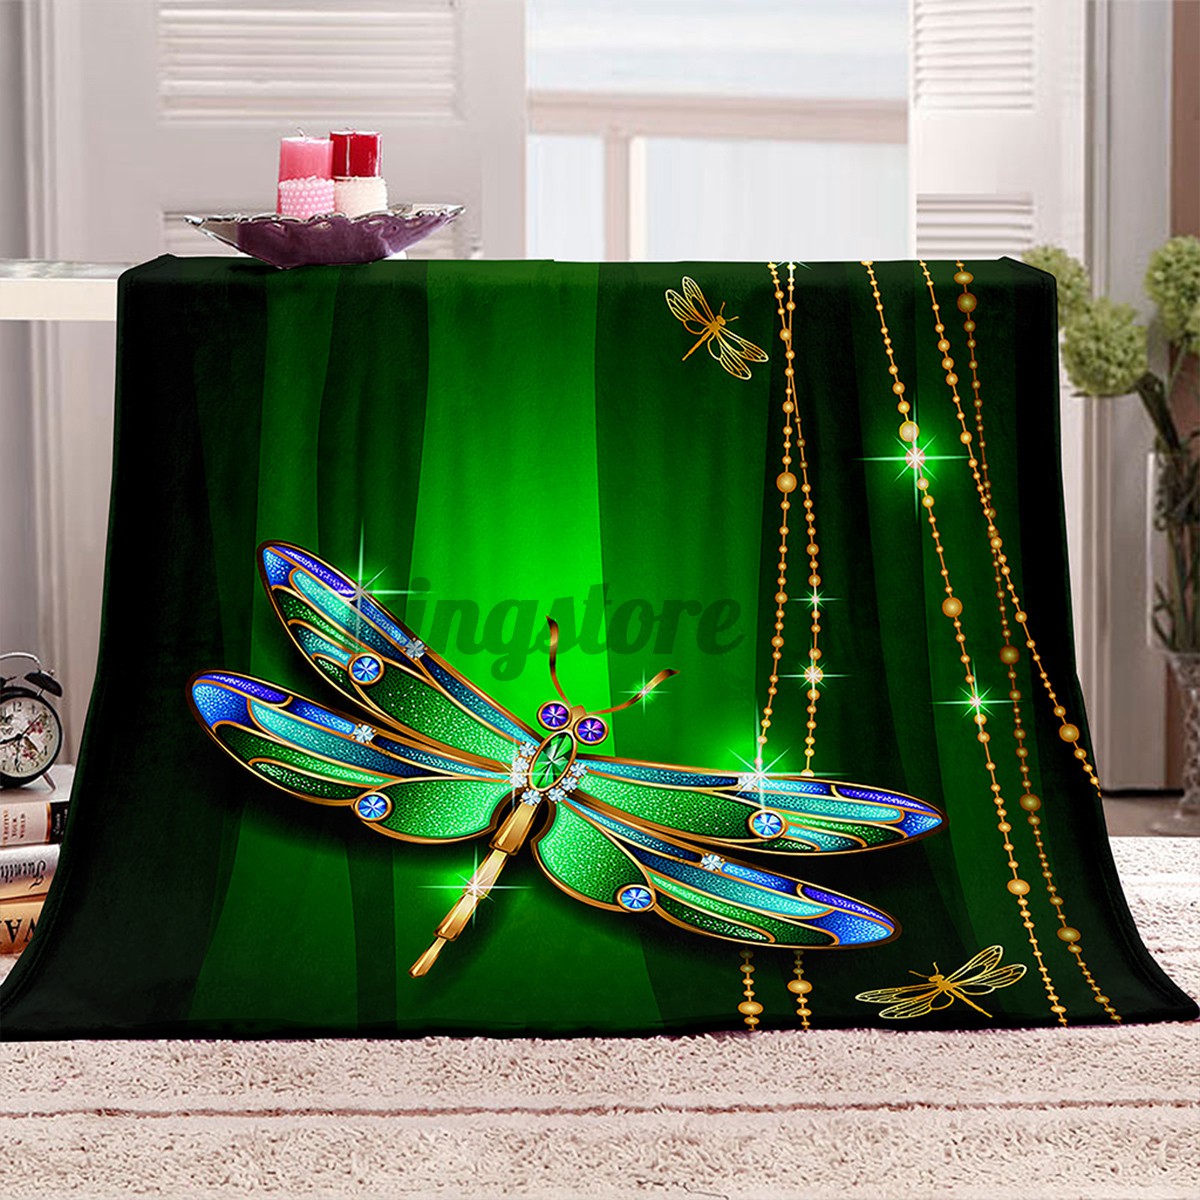 150x200CM Big Size 3D Dragonfly Printing Plush Fleece Blanket Adult Fashion Quilts Home Office Washable